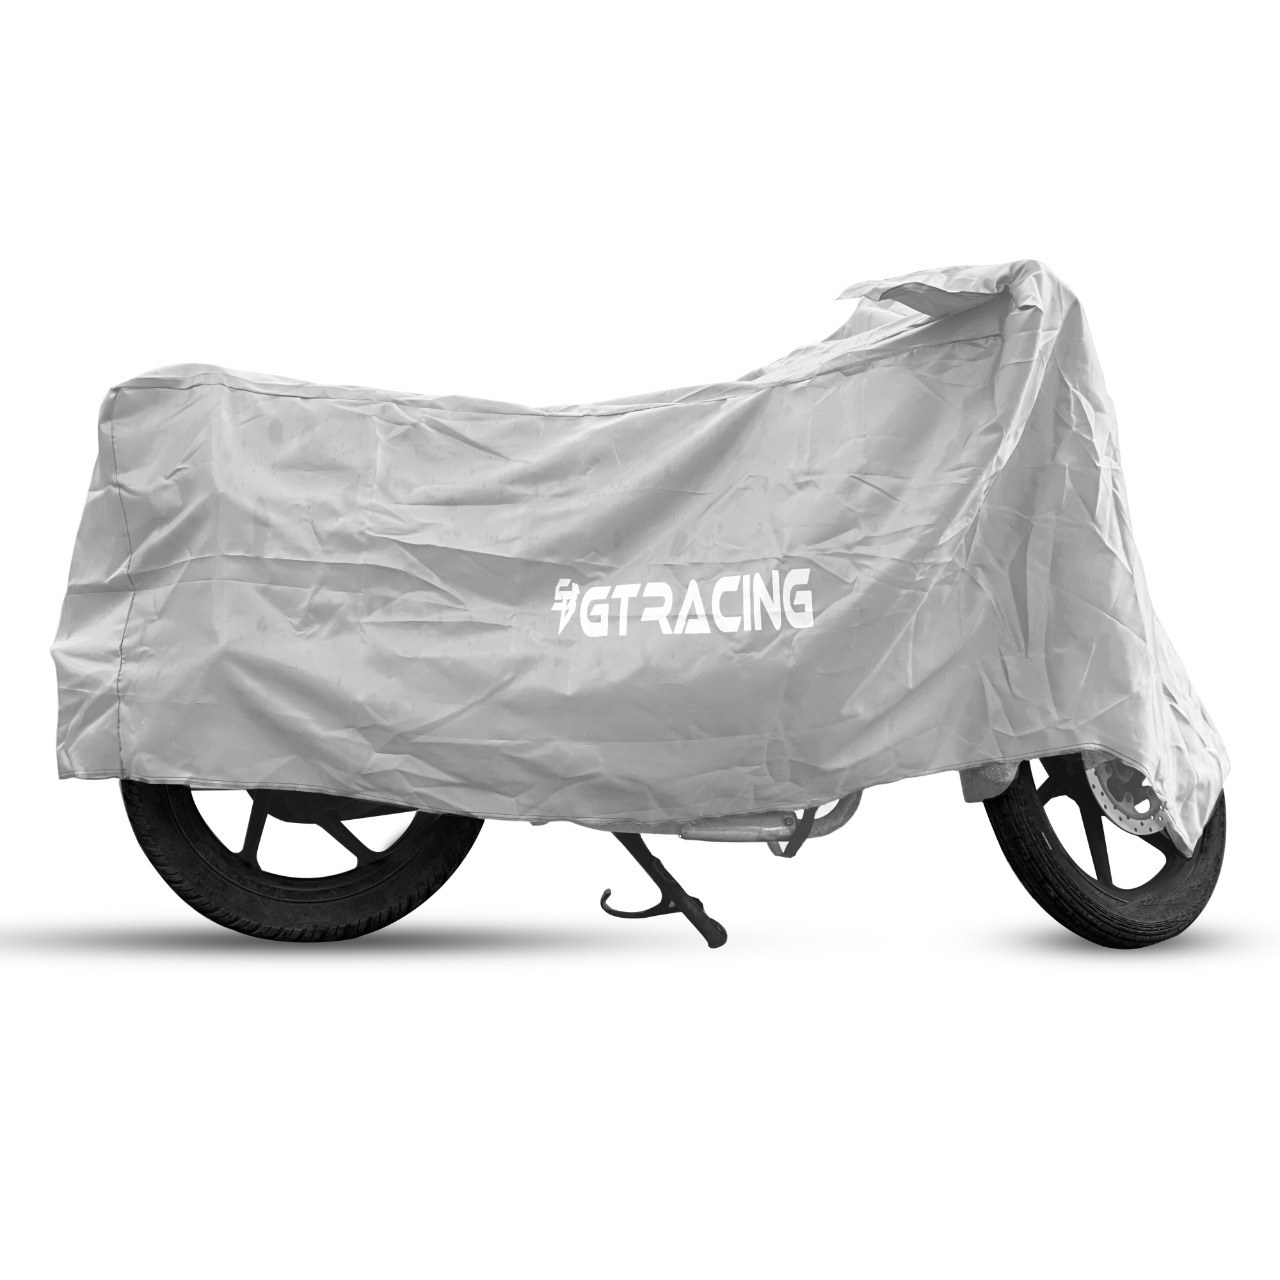 Steelbird Bike Cover GT Racing UV Protection Water-Resistant & Dustproof (Silver Matty), Bike Body Cover with Carry Bag (All Bikes upto Pulsar 180cc Size)